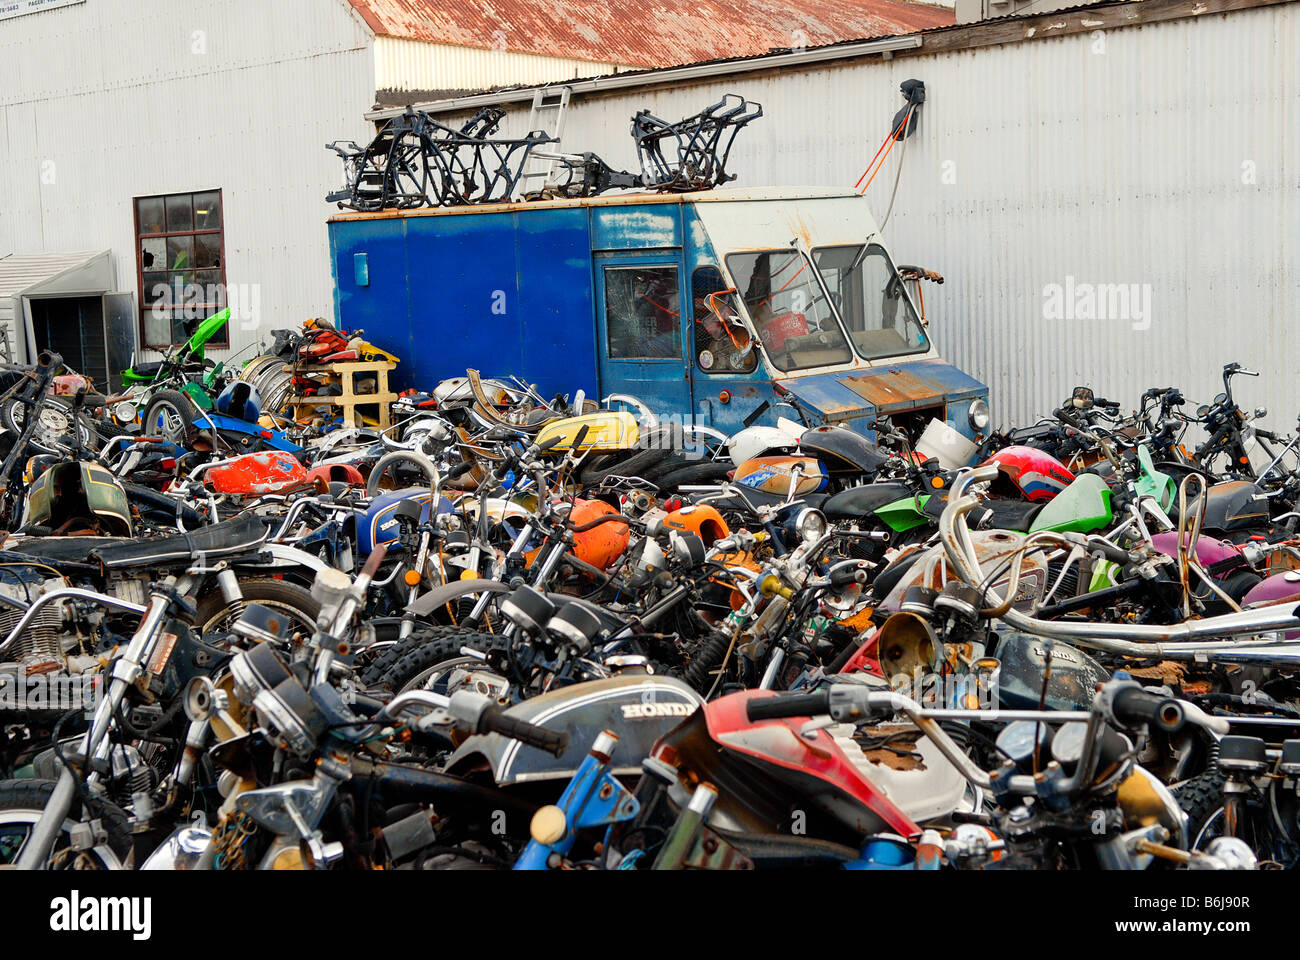 Old motorcycle parts, along with an old blue milk truck, make up a junkyard  mostly dedicated to motorcycle parts Stock Photo - Alamy